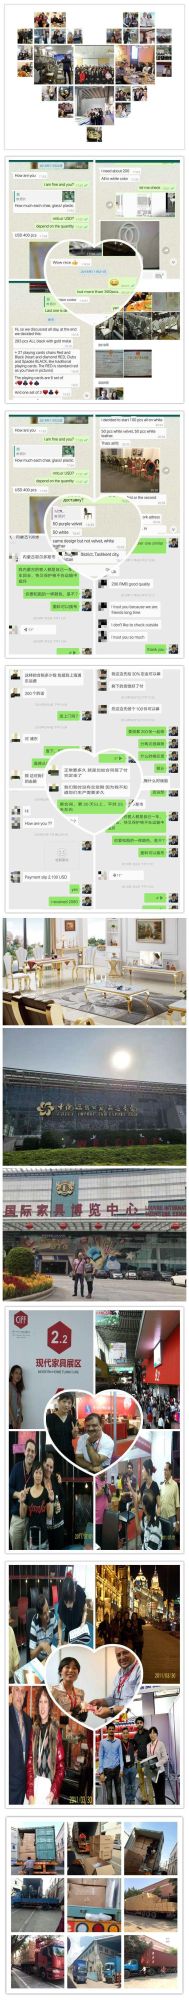 Cheap Restaurant Dining Wholesale Wedding Even Banquet Chairs Home New Design Leisure Couch Living Room Set in Chinese Factory Furniture